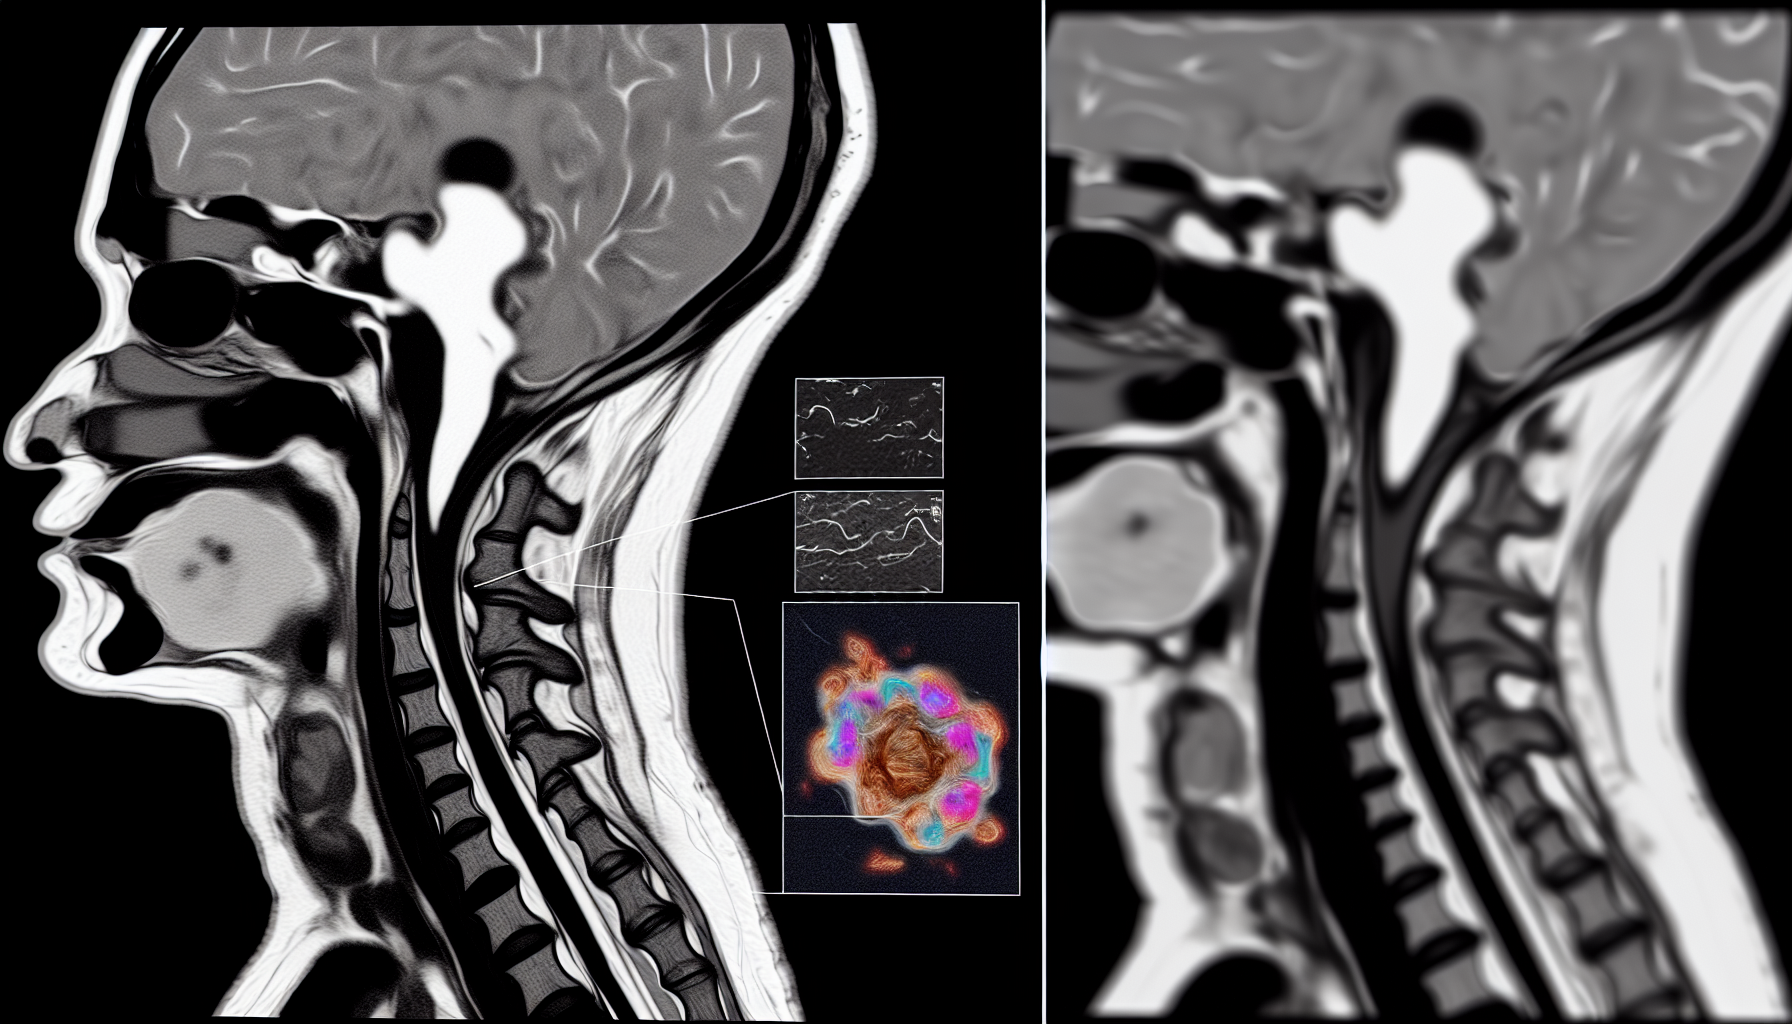 MRI scan showing herniated cervical disc